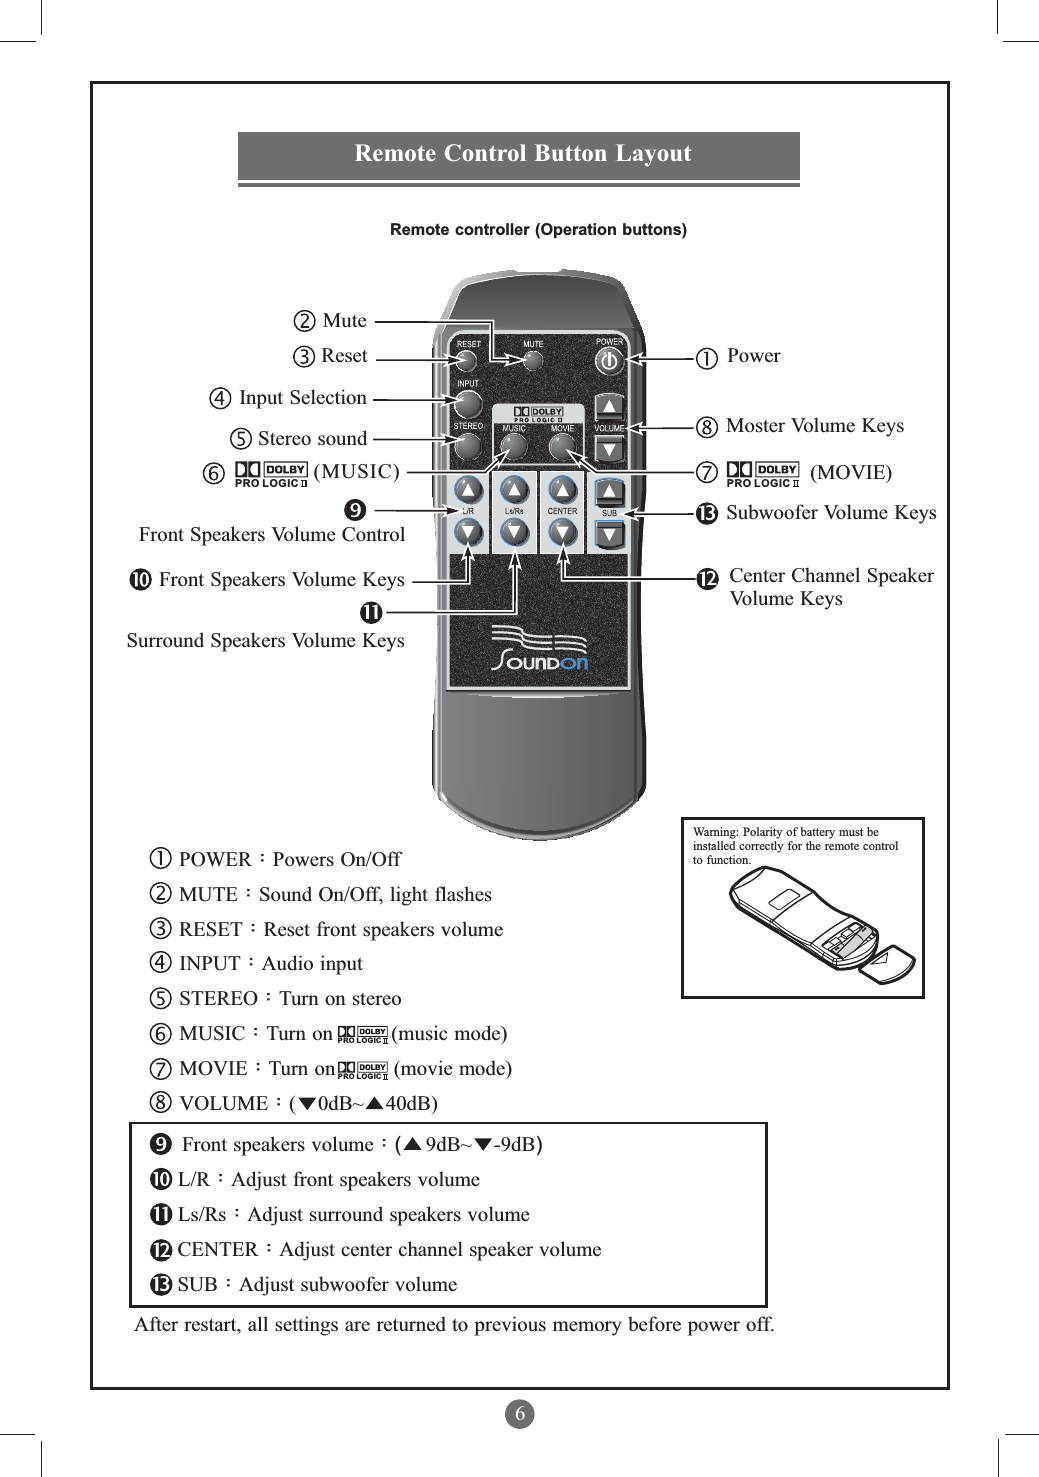 6Remote controller (Operation buttons)POWER：Powers On/OffMUTE：Sound On/Off, light flashesRESET：Reset front speakers volumeINPUT：Audio inputSTEREO：Turn on stereo MUSIC：Turn on           (music mode)MOVIE：Turn on           (movie mode)   VOLUME：(    0dB~    40dB)   ：(    9dB~    -9dB)Front speakers volume     L/R：Adjust front speakers volume      Ls/Rs：Adjust surround speakers volume       CENTER：Adjust center channel speaker volume       SUB：Adjust subwoofer volume (MUSIC)                   (MOVIE)111213111213PRO LOGIC PRO LOGICRemote Control Button LayoutPowerMoster Volume KeysSubwoofer Volume KeysCenter Channel Speaker Volume KeysResetMuteInput SelectionStereo soundFront Speakers Volume ControlFront Speakers Volume KeysSurround Speakers Volume KeysWarning: Polarity of battery must be installed correctly for the remote control to function.PRO LOGICPRO LOGICAfter restart, all settings are returned to previous memory before power off.